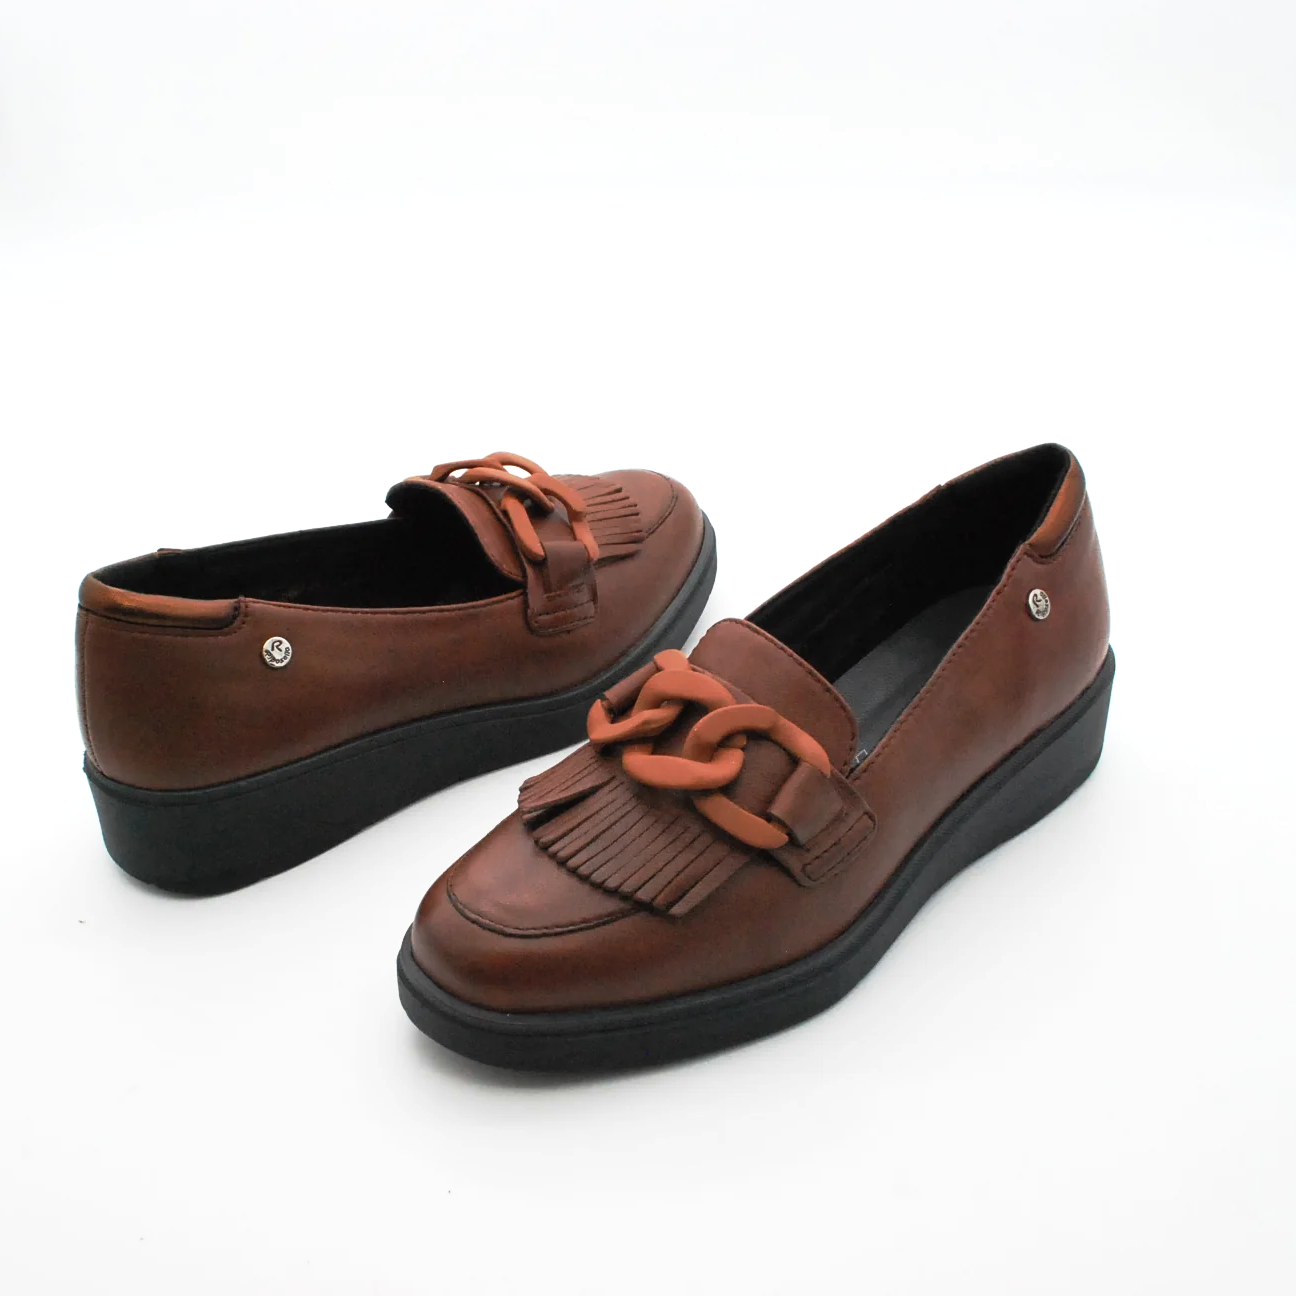 mocassino-riposella-in-pelle-comfort-2_3d4903ff-64be-4c29-bc64-38034f51bc5f.png